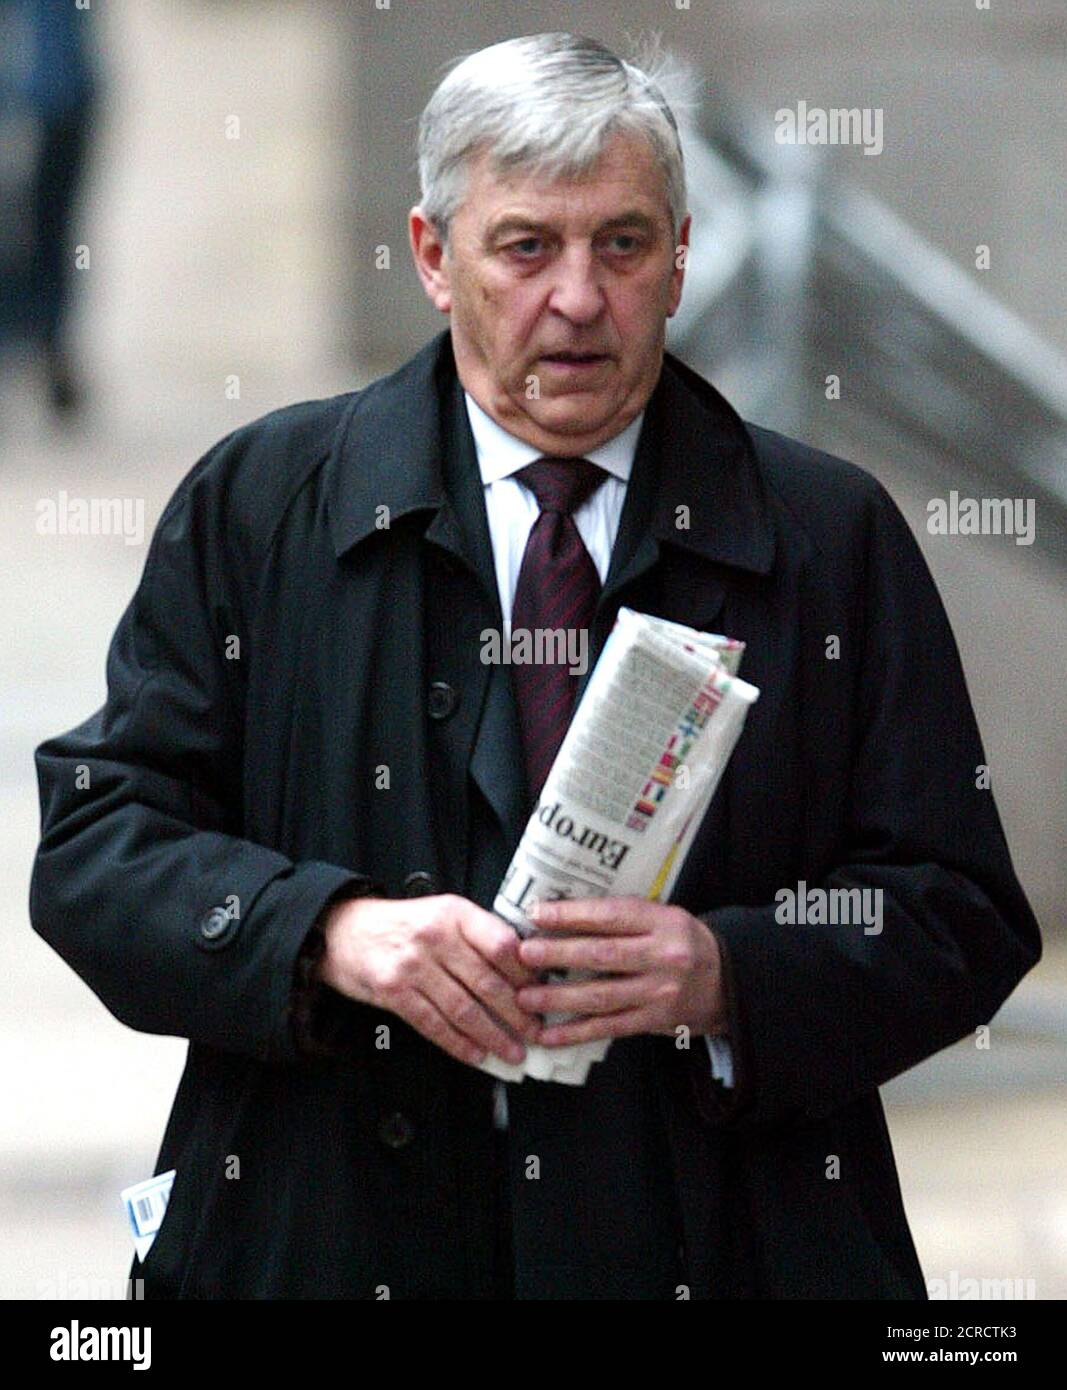 Stephen Coward QC, defence lawyer for Britain's Ian Huntley, arrives at the Old Bailey for the Soham murder trial in London, December 12, 2003. Former school caretaker Huntley is charged with the double murder of British schoolgirls Holly Wells and Jessica Chapman in August 2002. REUTERS/Stephen Hird  SH/ASA/WS Stock Photo